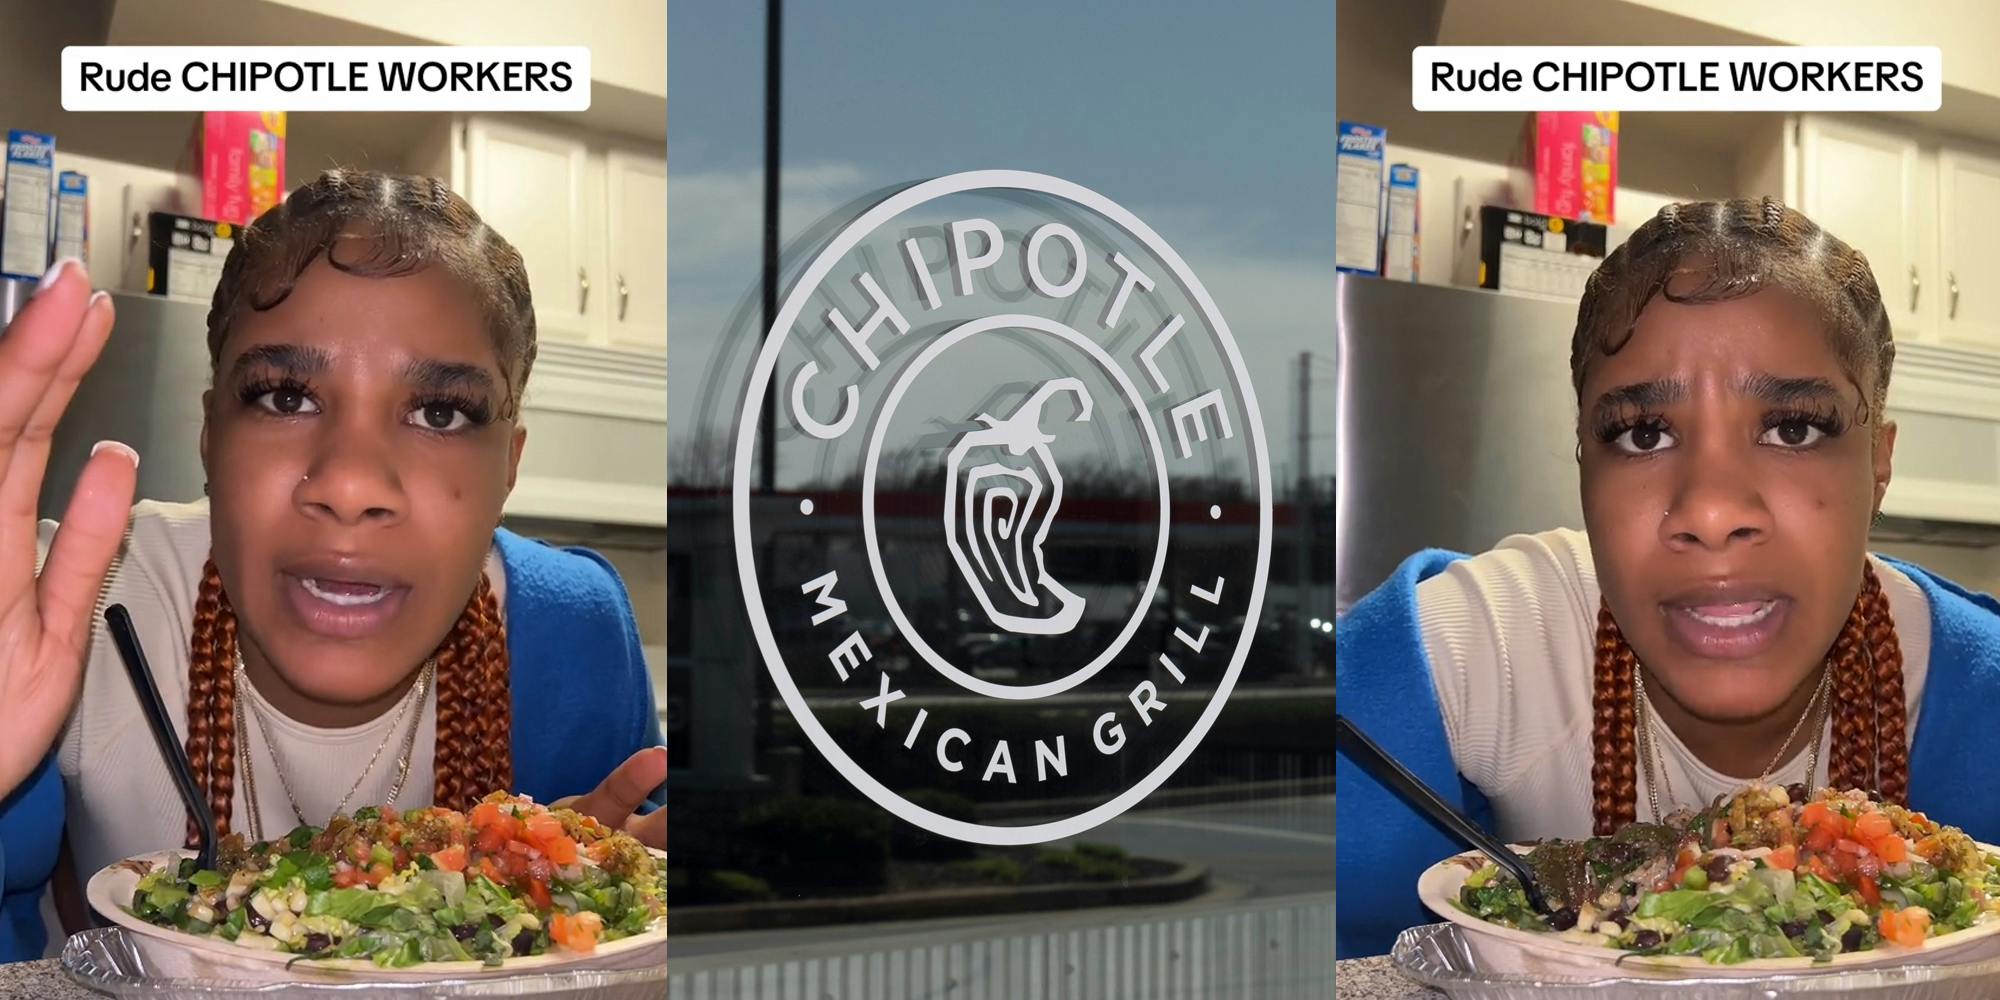 Chipotle customer speaking with caption "Rude CHIPOTLE WORKERS" (l) Chipotle sign on glass door (c) Chipotle customer speaking with caption "Rude CHIPOTLE WORKERS" (r)